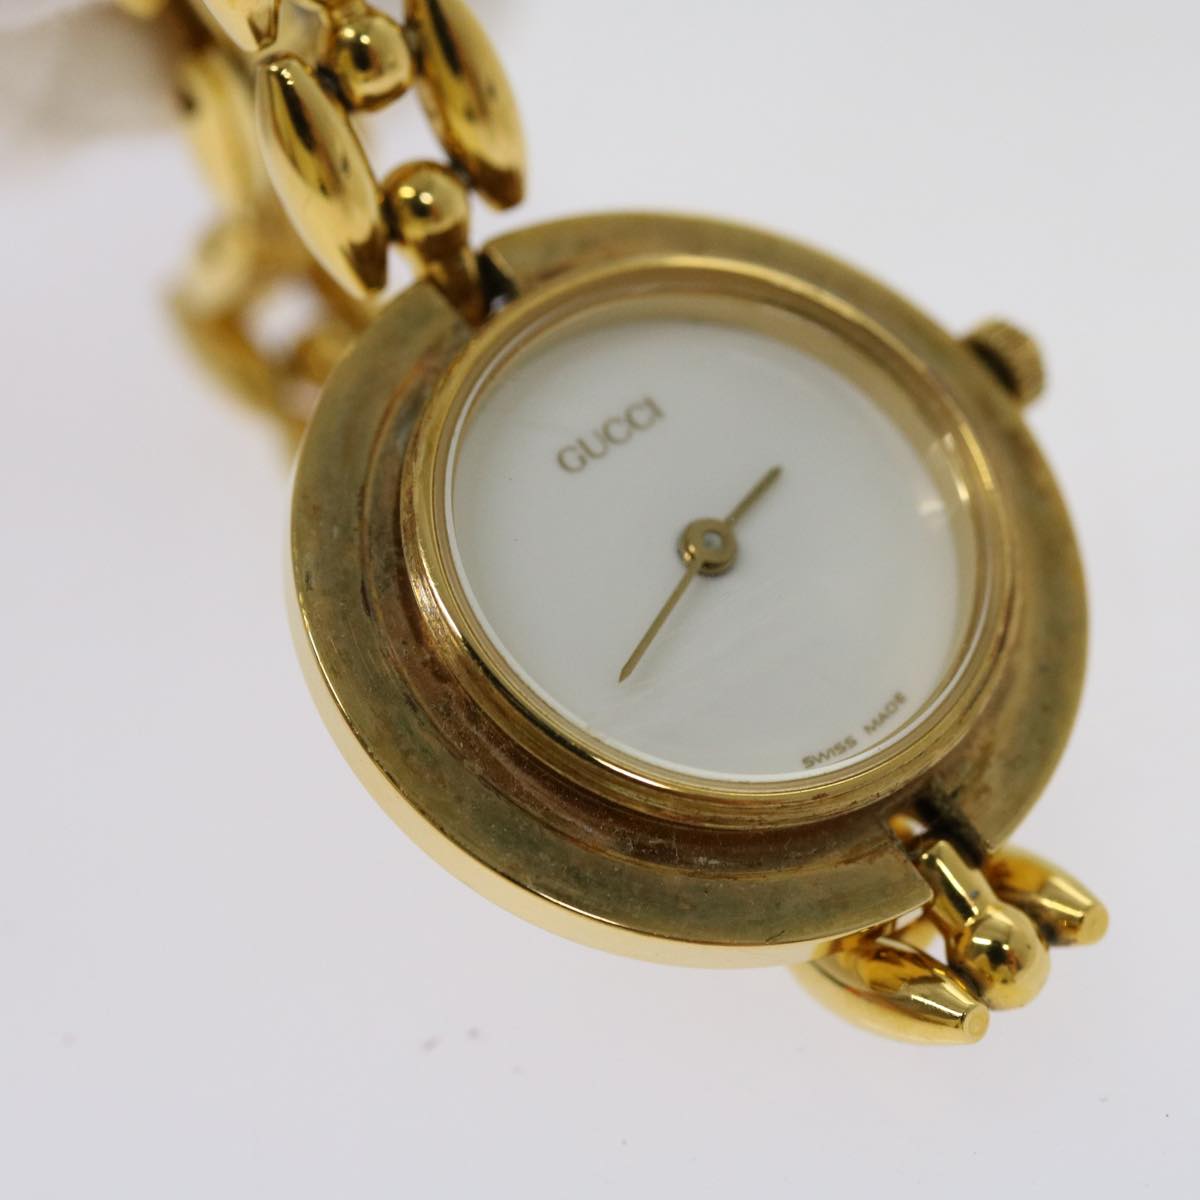 GUCCI Watches metal Gold Auth am5999